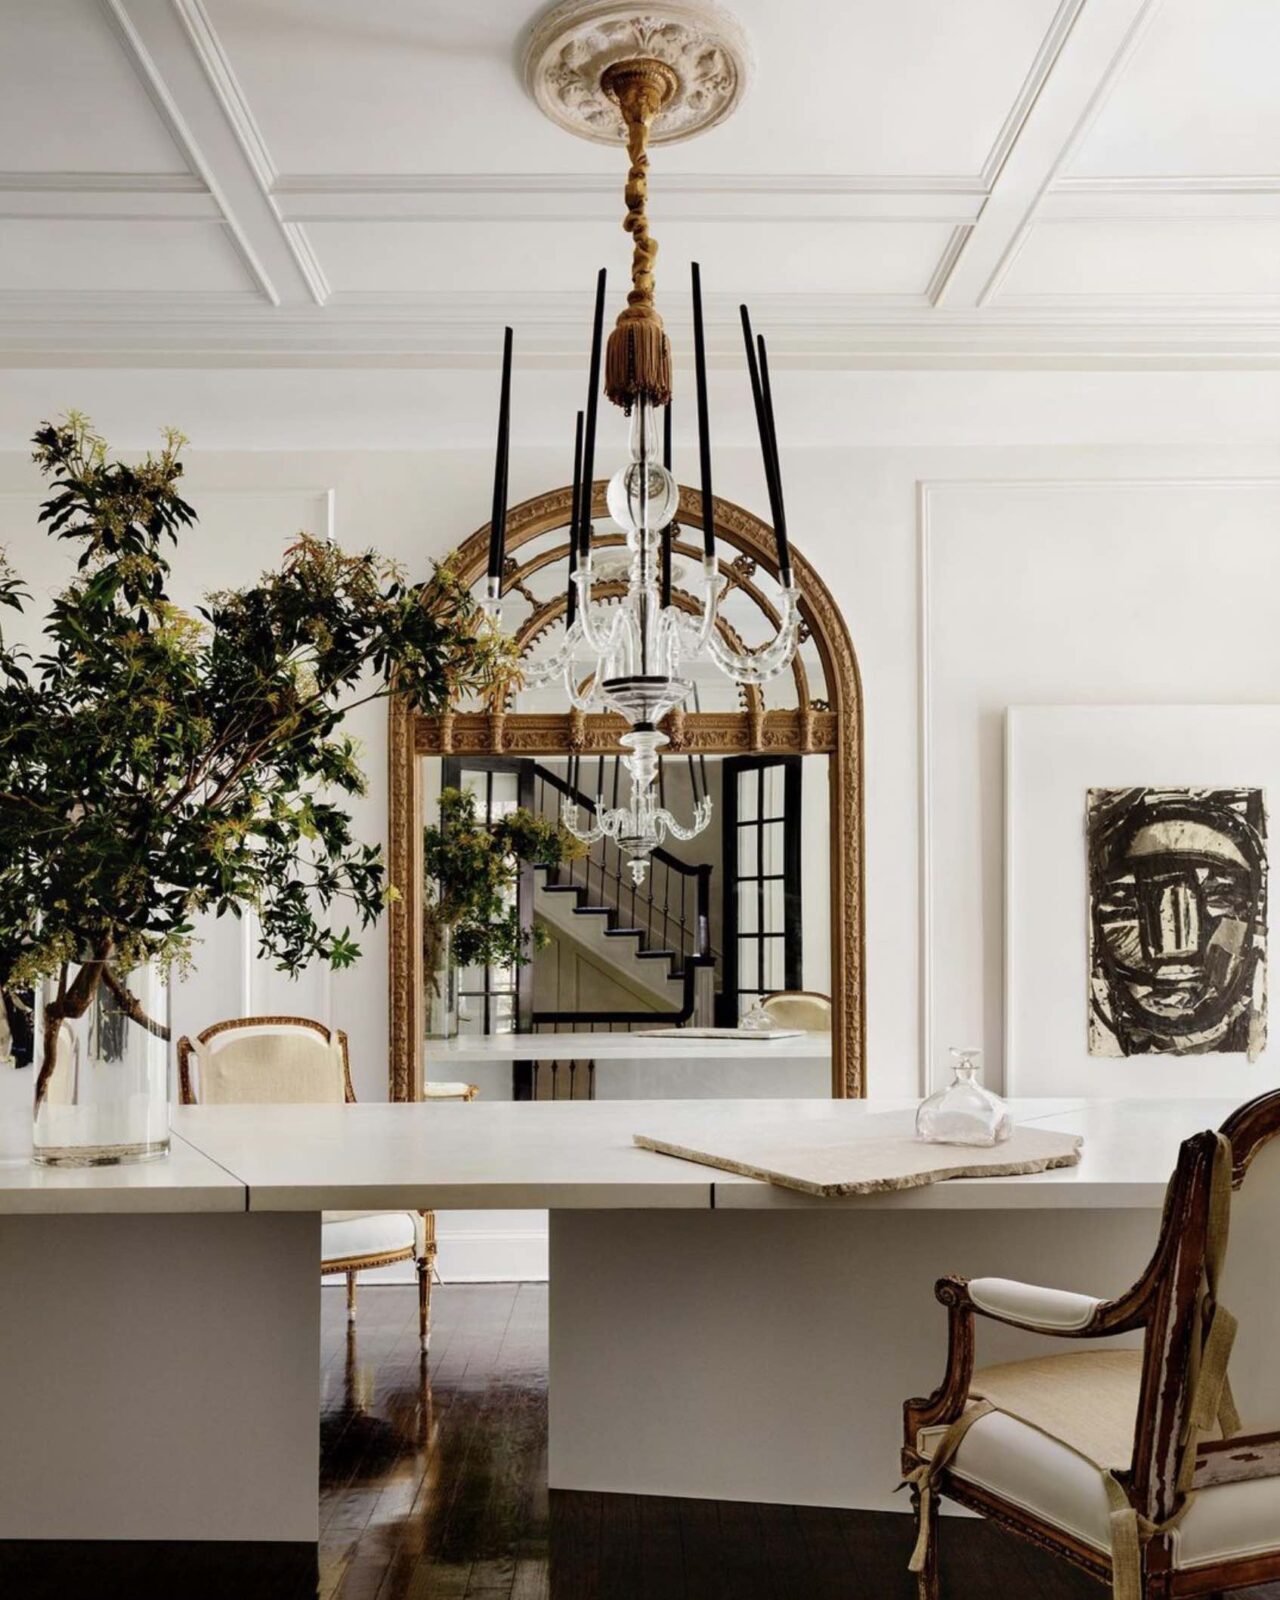 Dining room with white walls, large white dining table, antique gold upholstered chairs, chandelier, and large antique gilded mirror